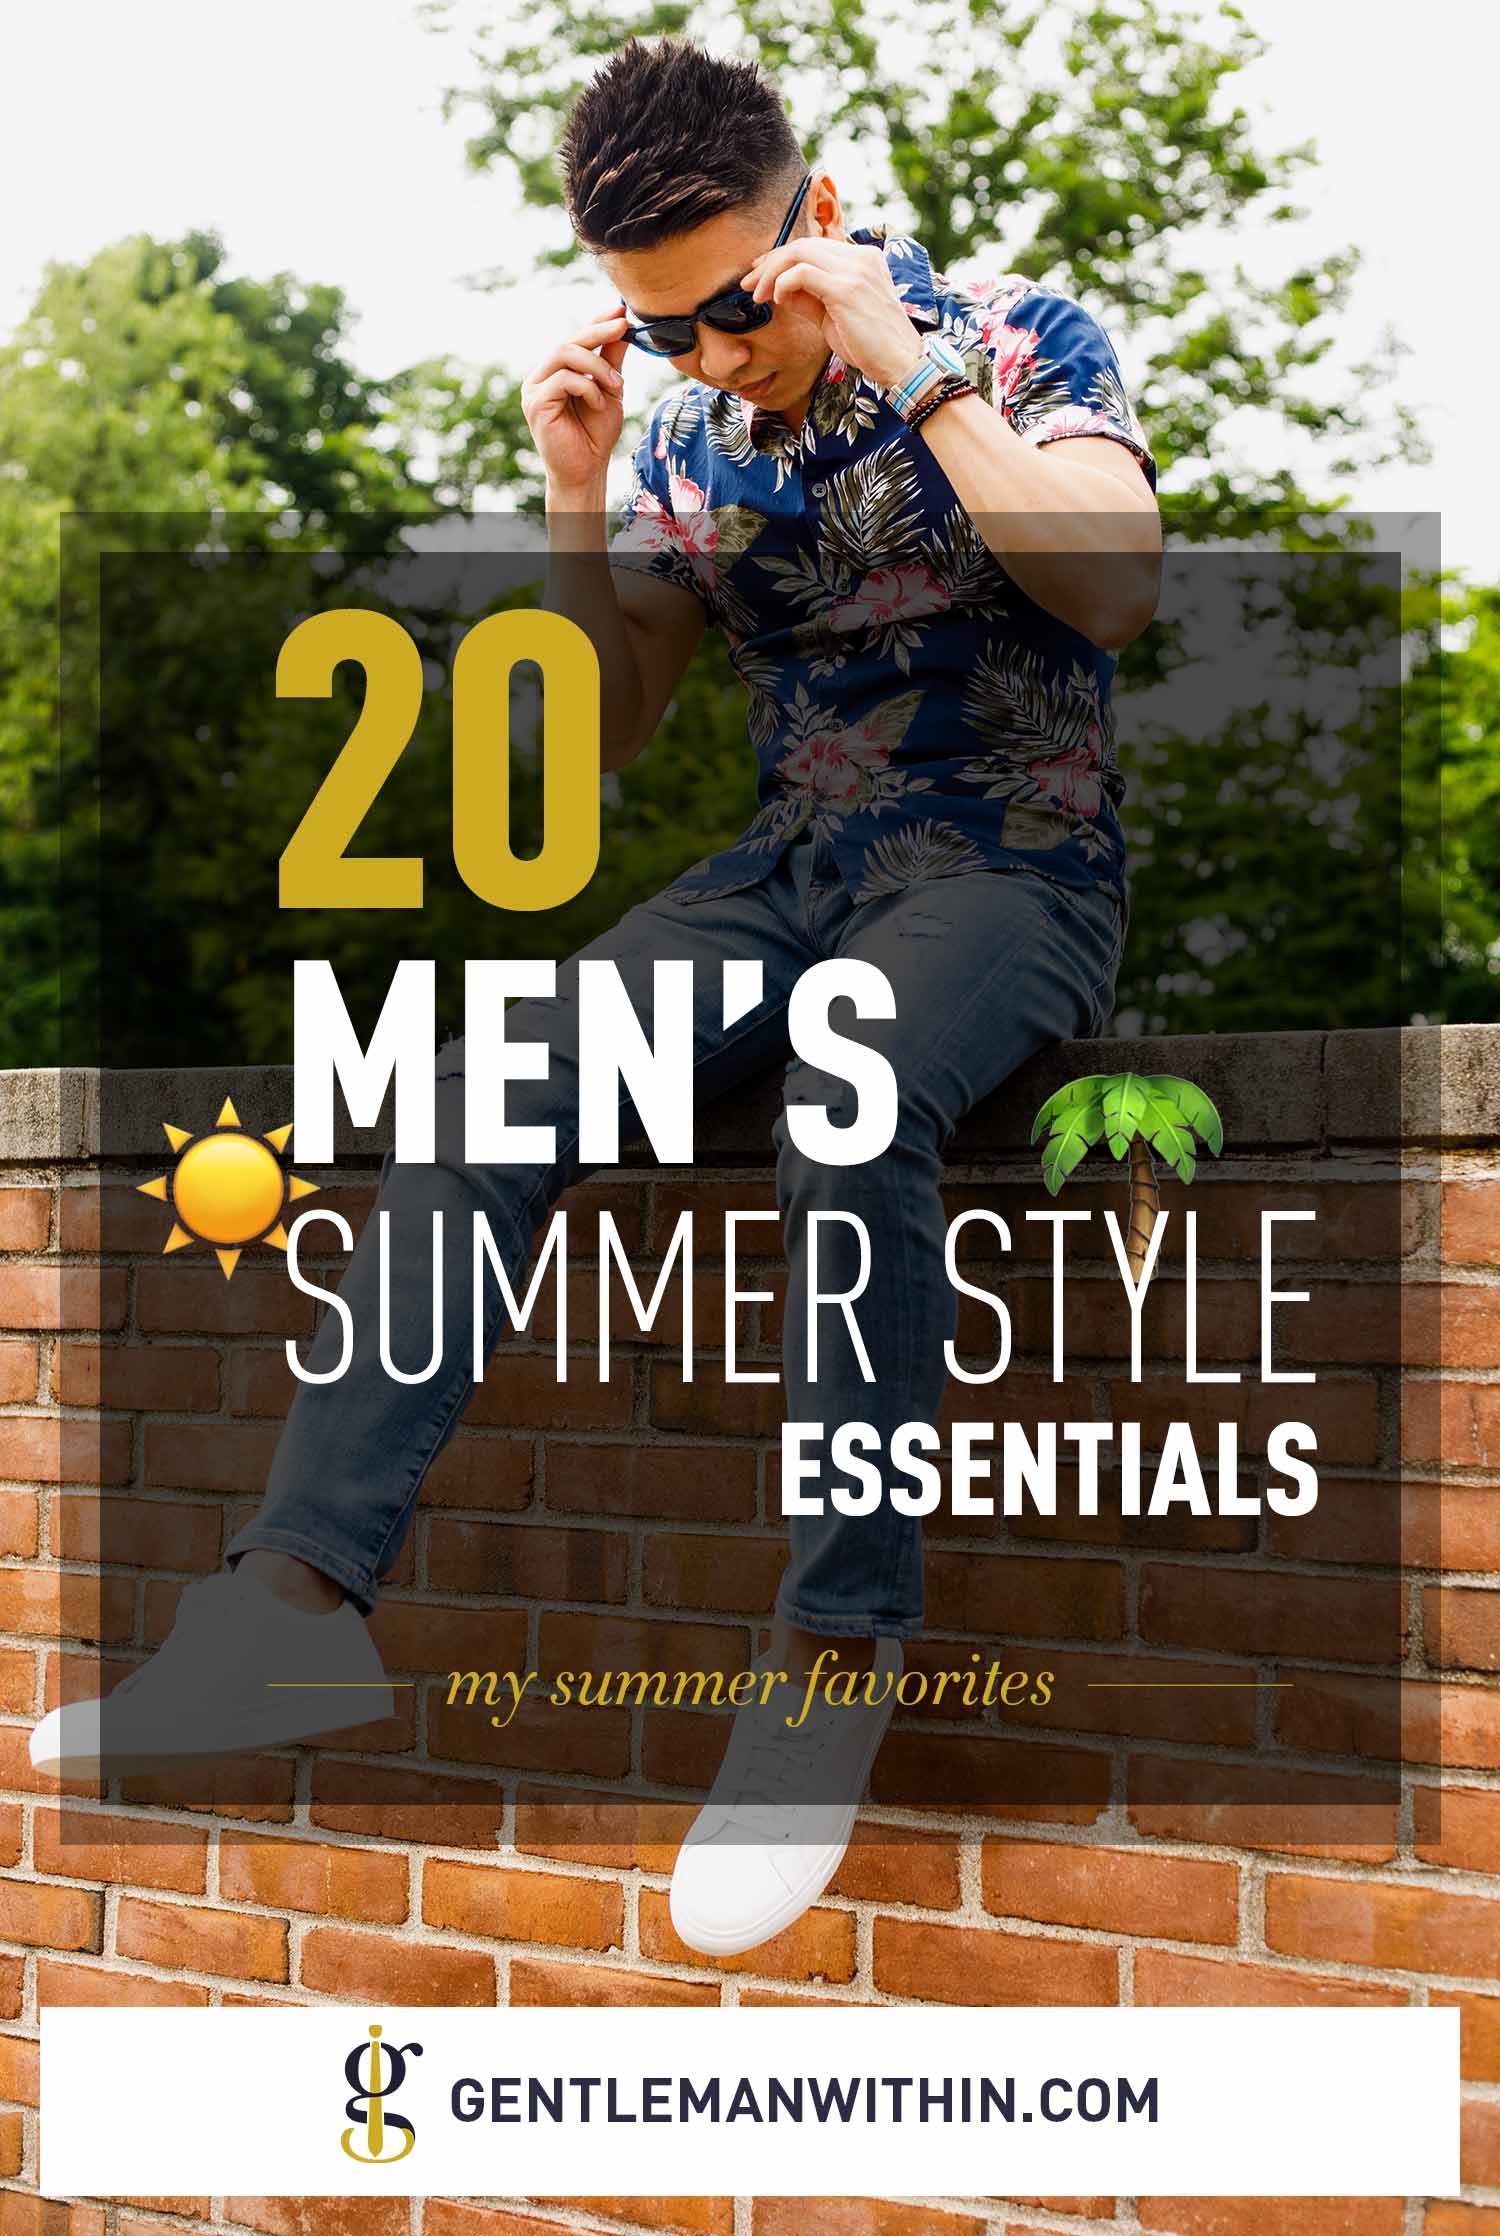 Men's Summer Fashion: 20 Menswear Essentials (a Style Guide for Guys) | GENTLEMAN WITHIN